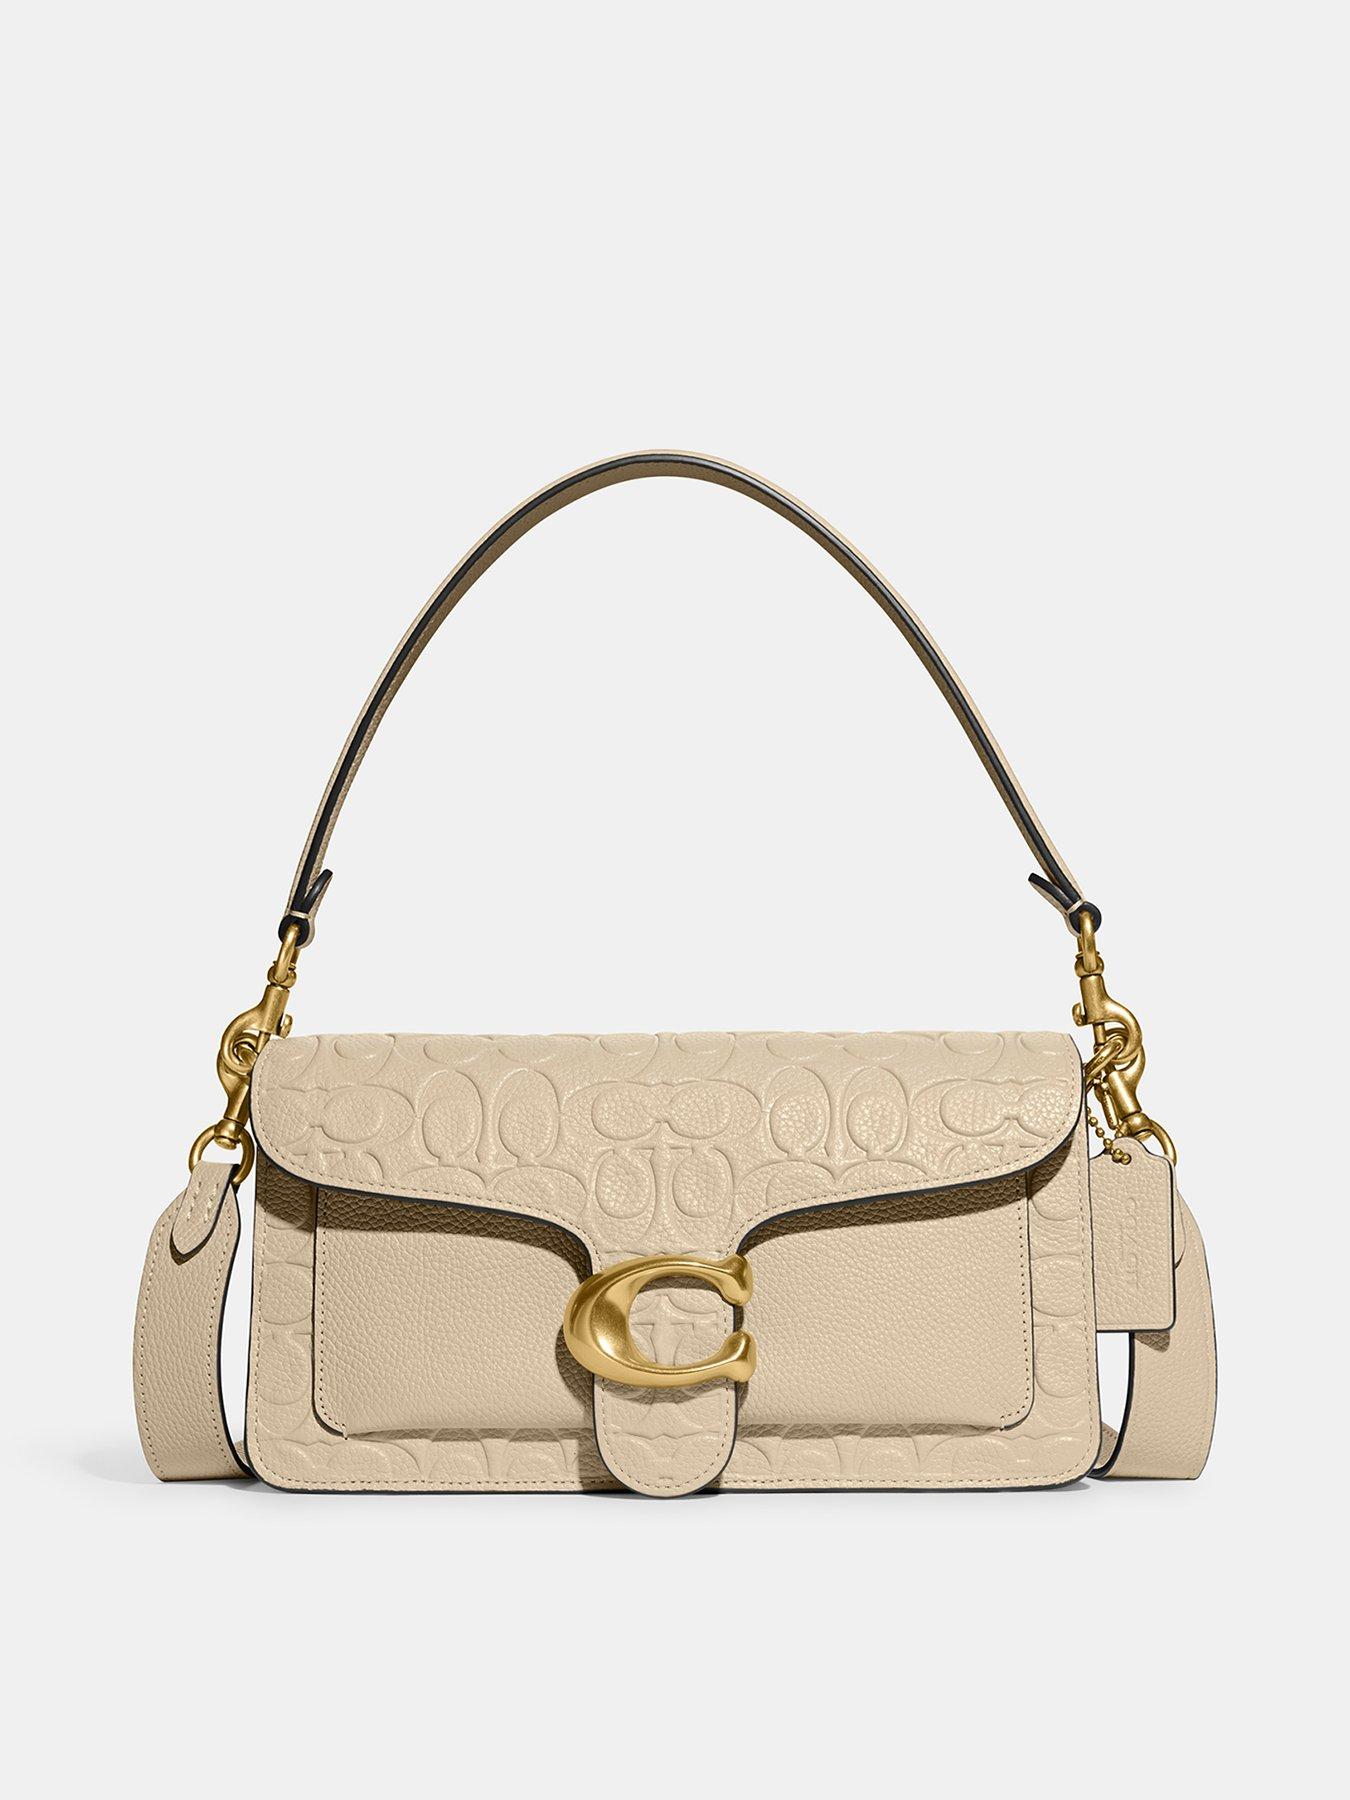 COACH Signature Leather Tabby Shoulder Bag 26 - Ivory 